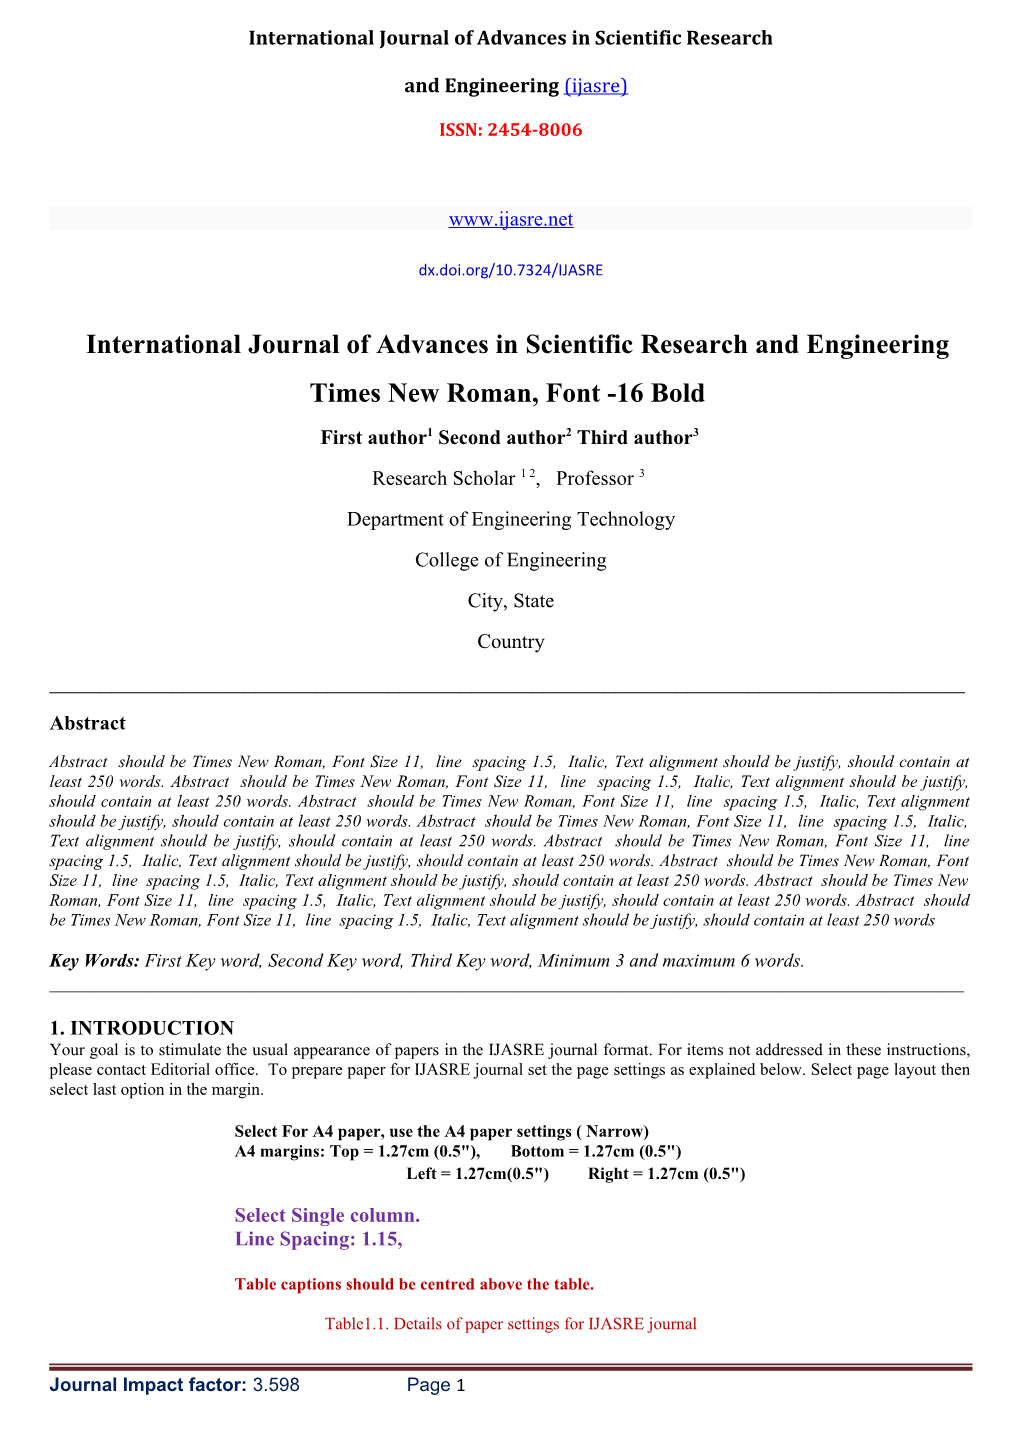 International Journal of Advances in Scientific Research and Engineering